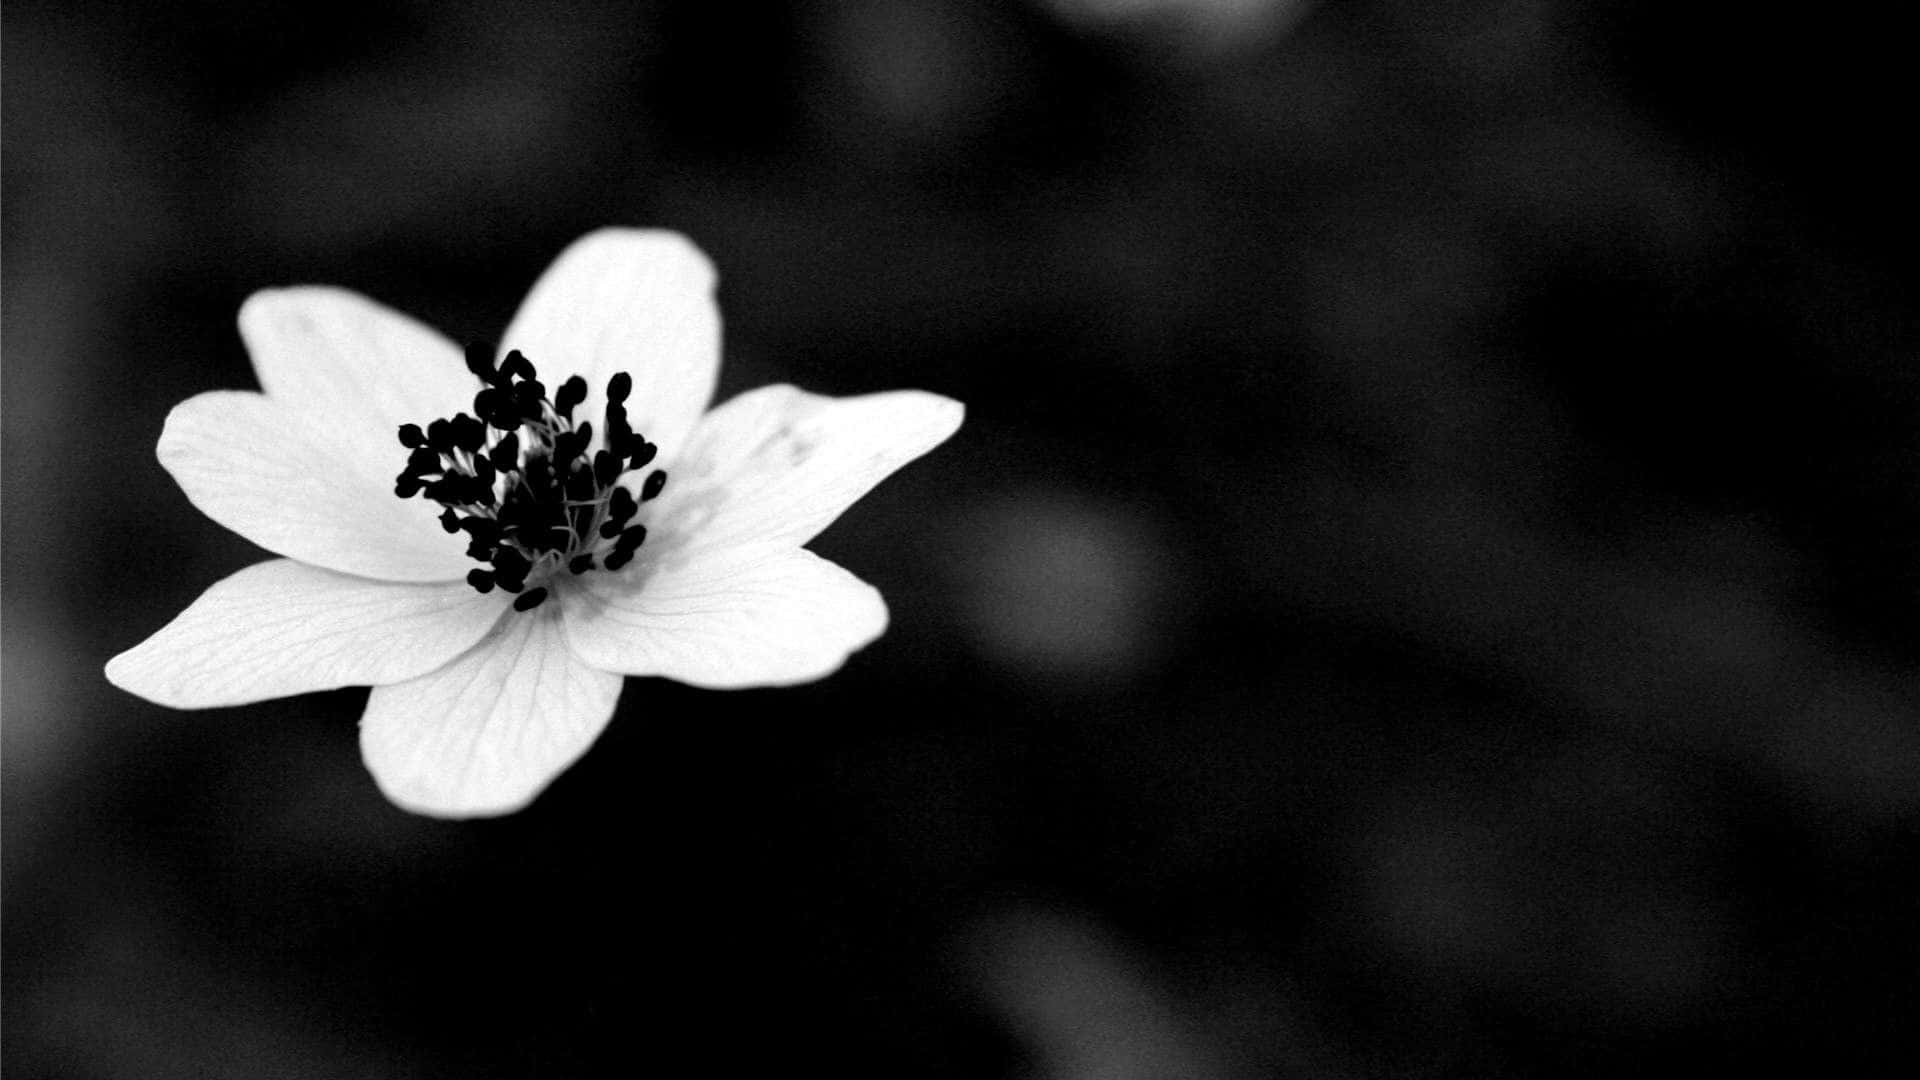 100+] Black And White Flower Background s 